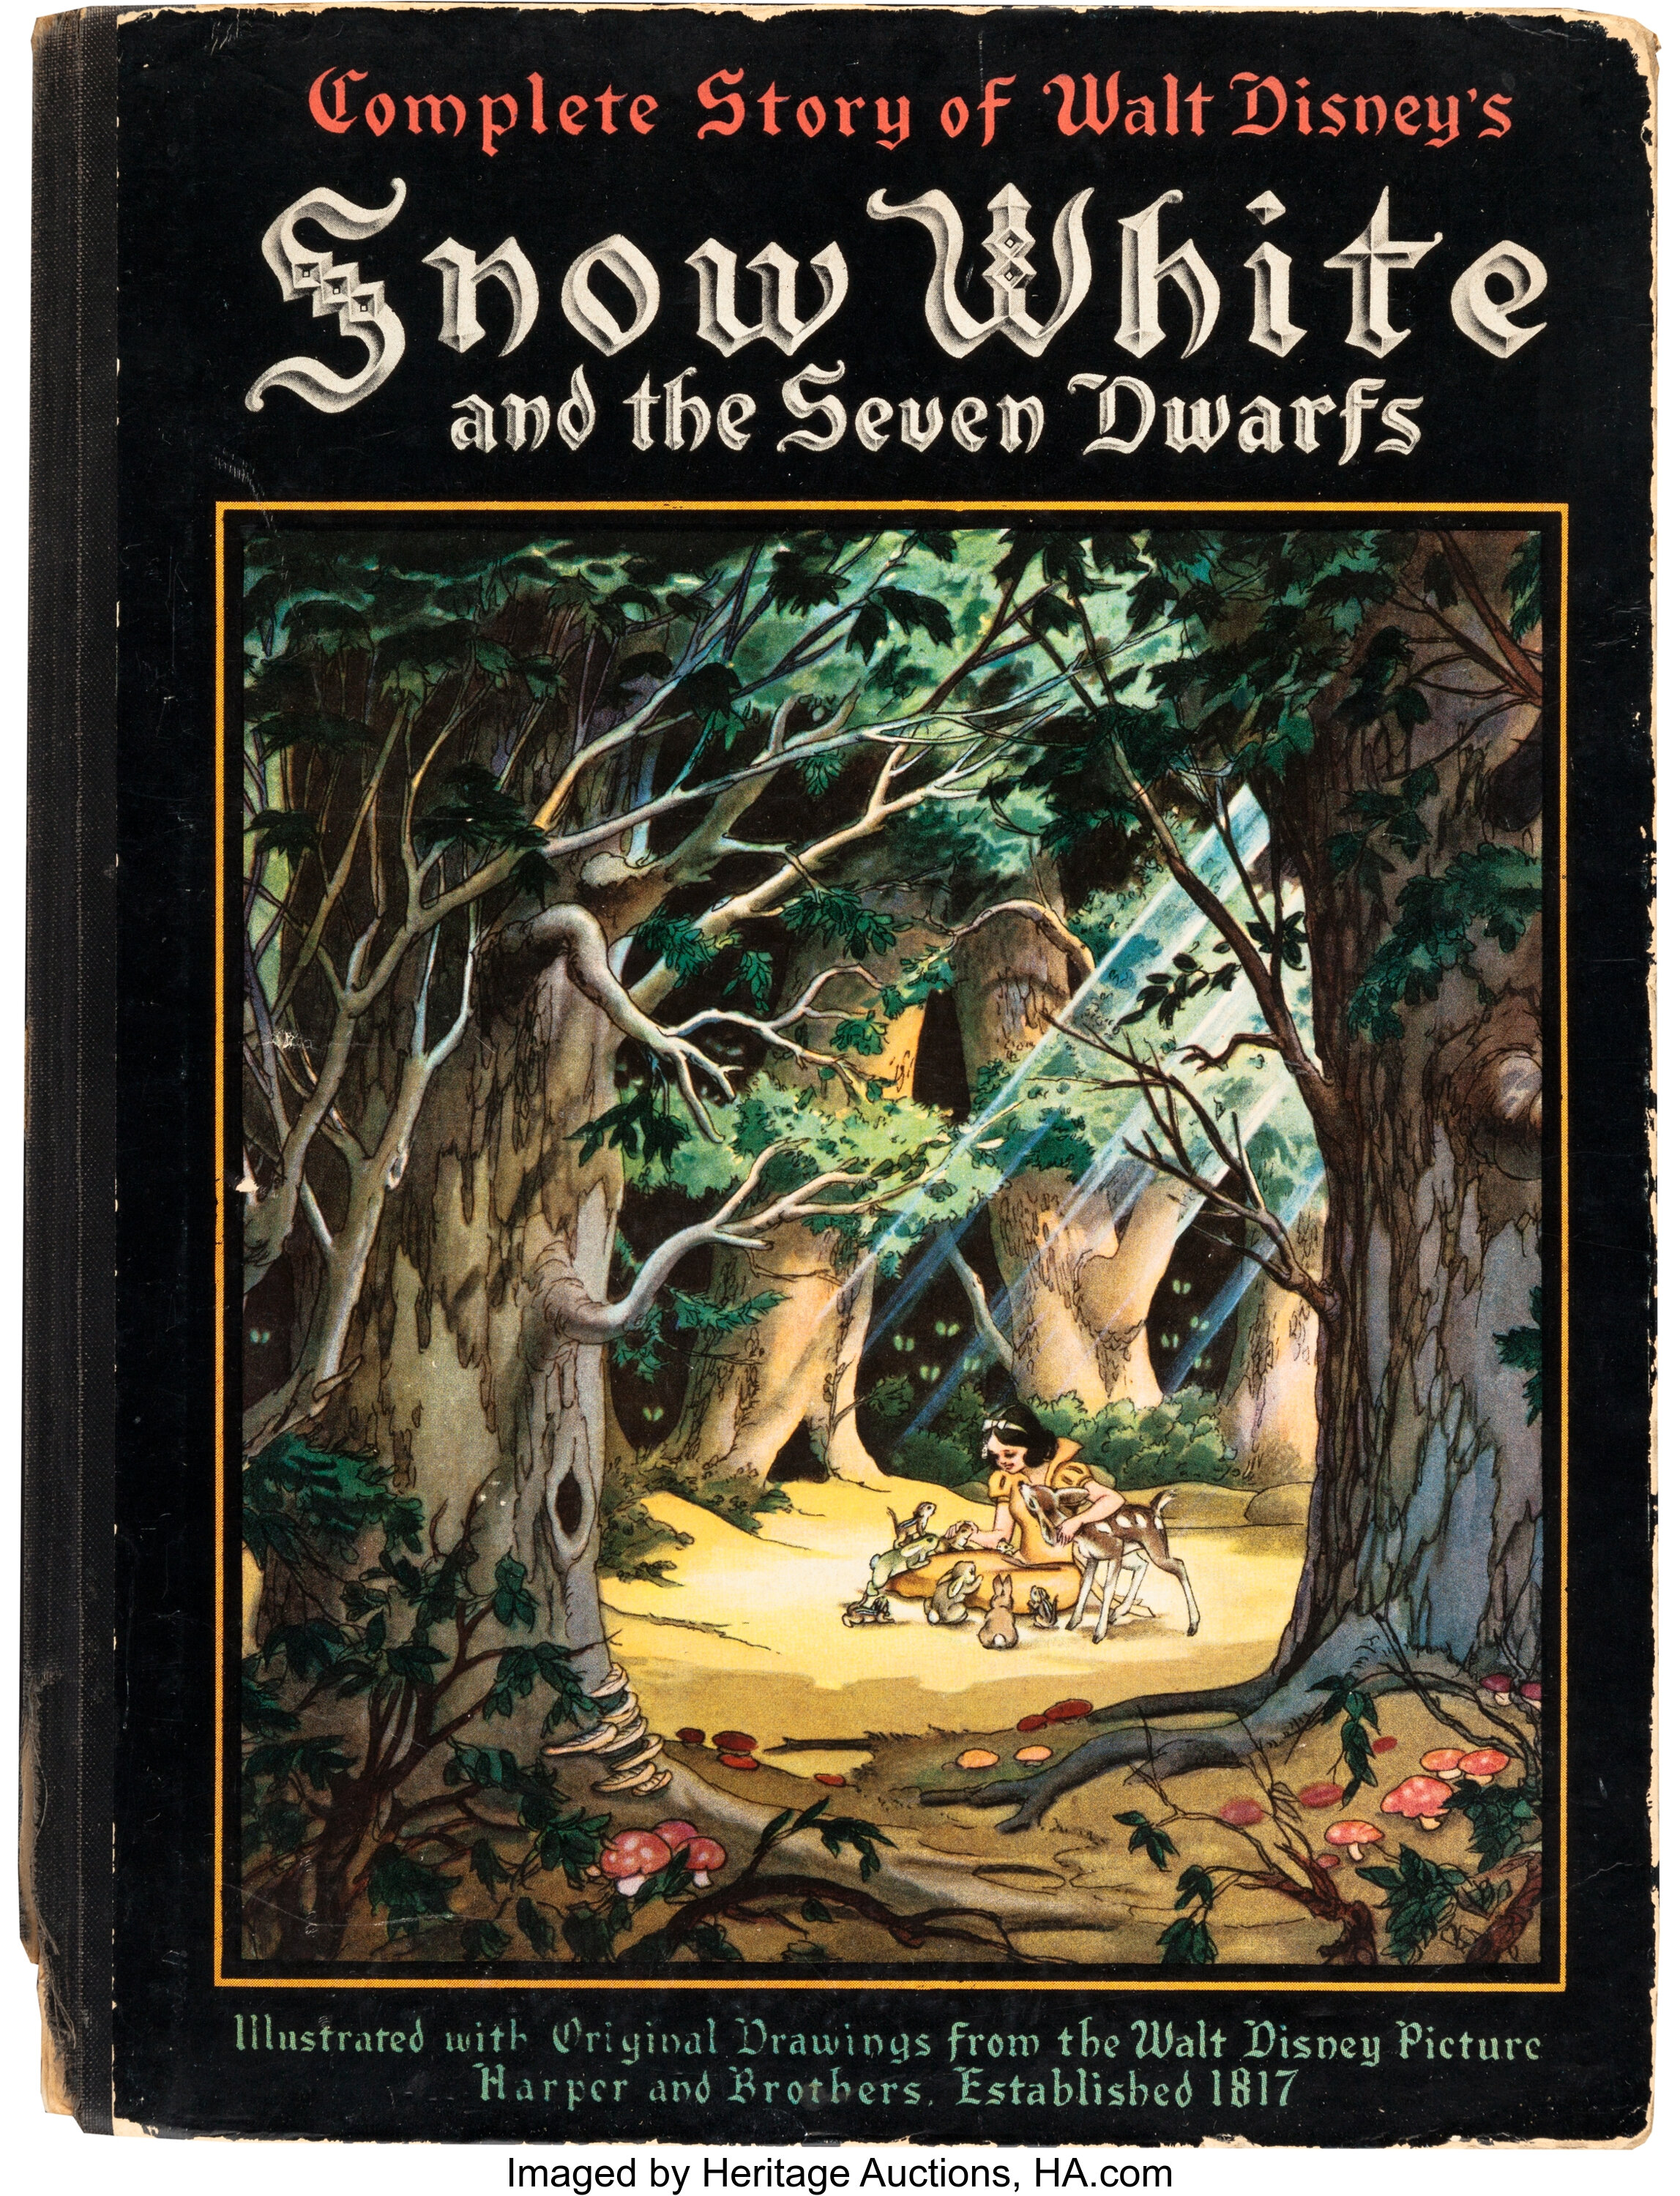 The Complete Story Of Snow White Book With Spectacular Walt Disney Lot 94079 Heritage Auctions 